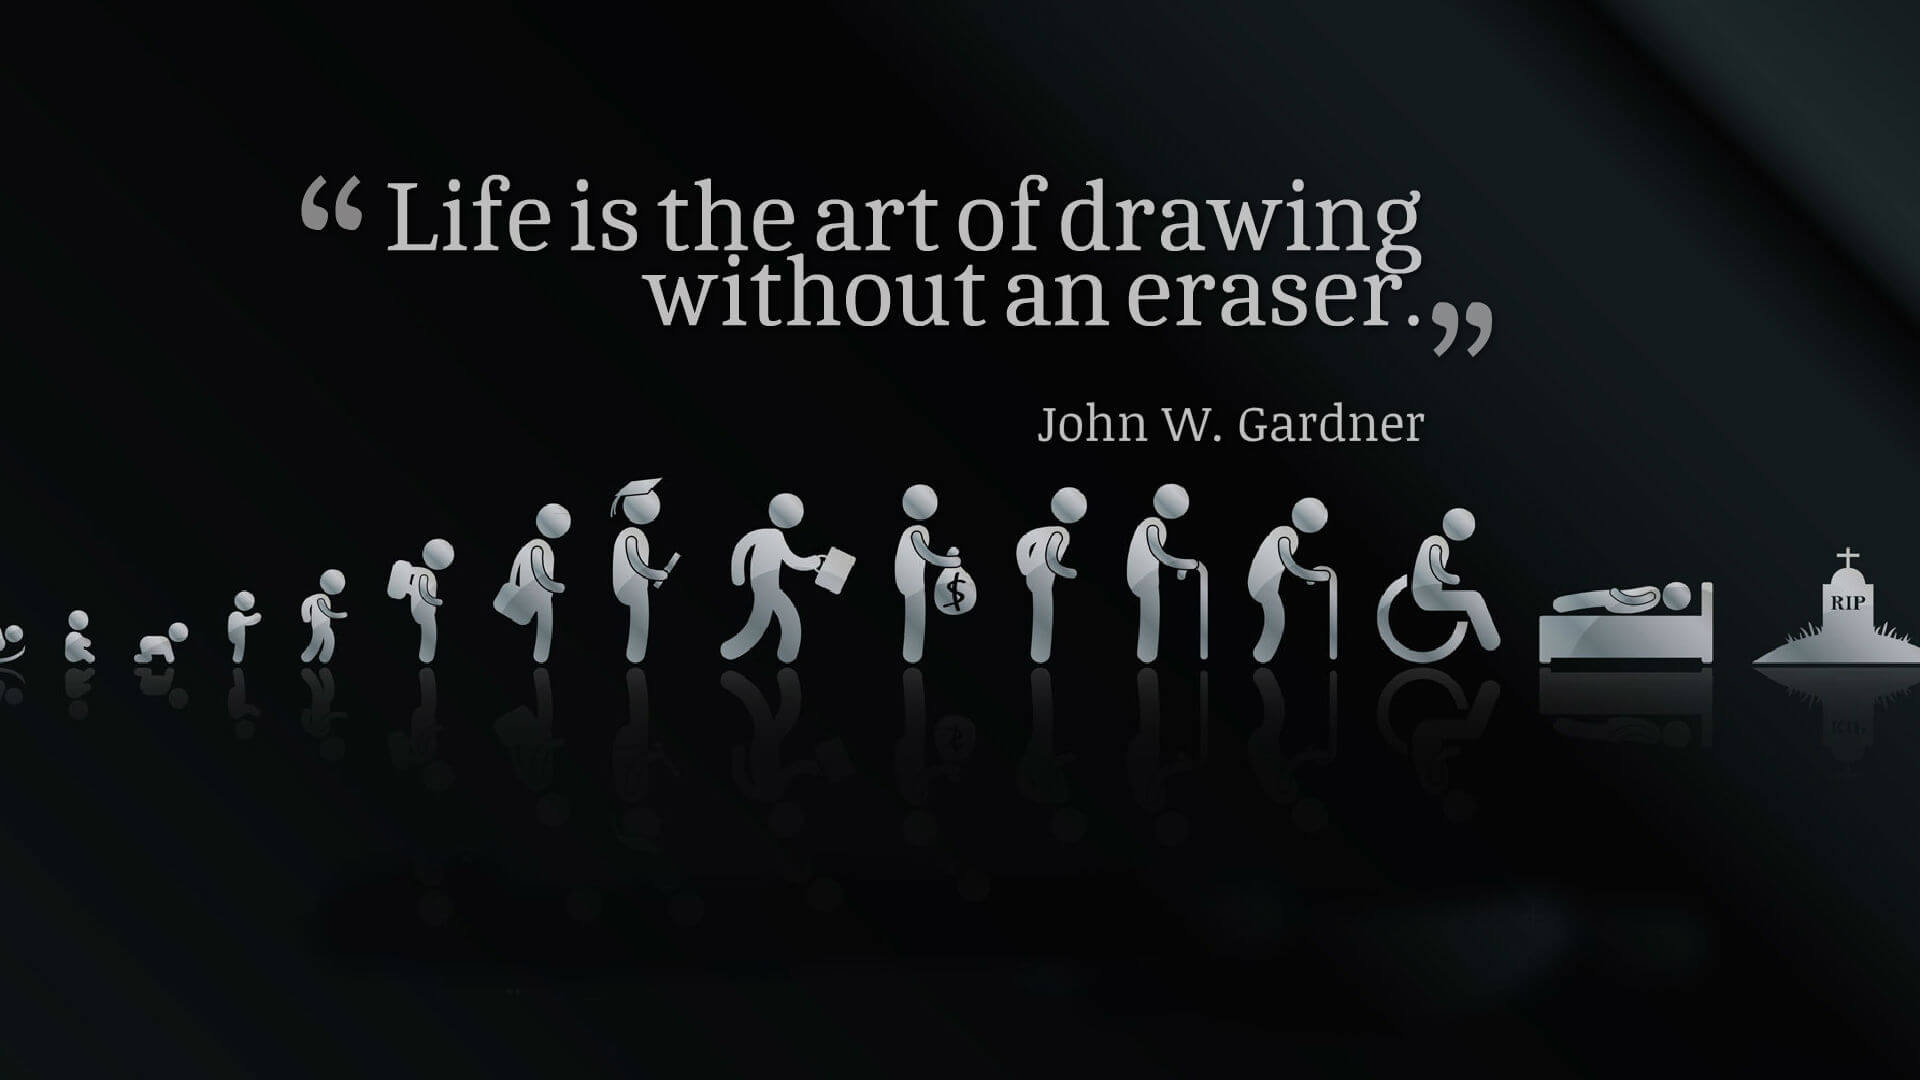 Life is the art of drawing without an eraser. John W. Gardner